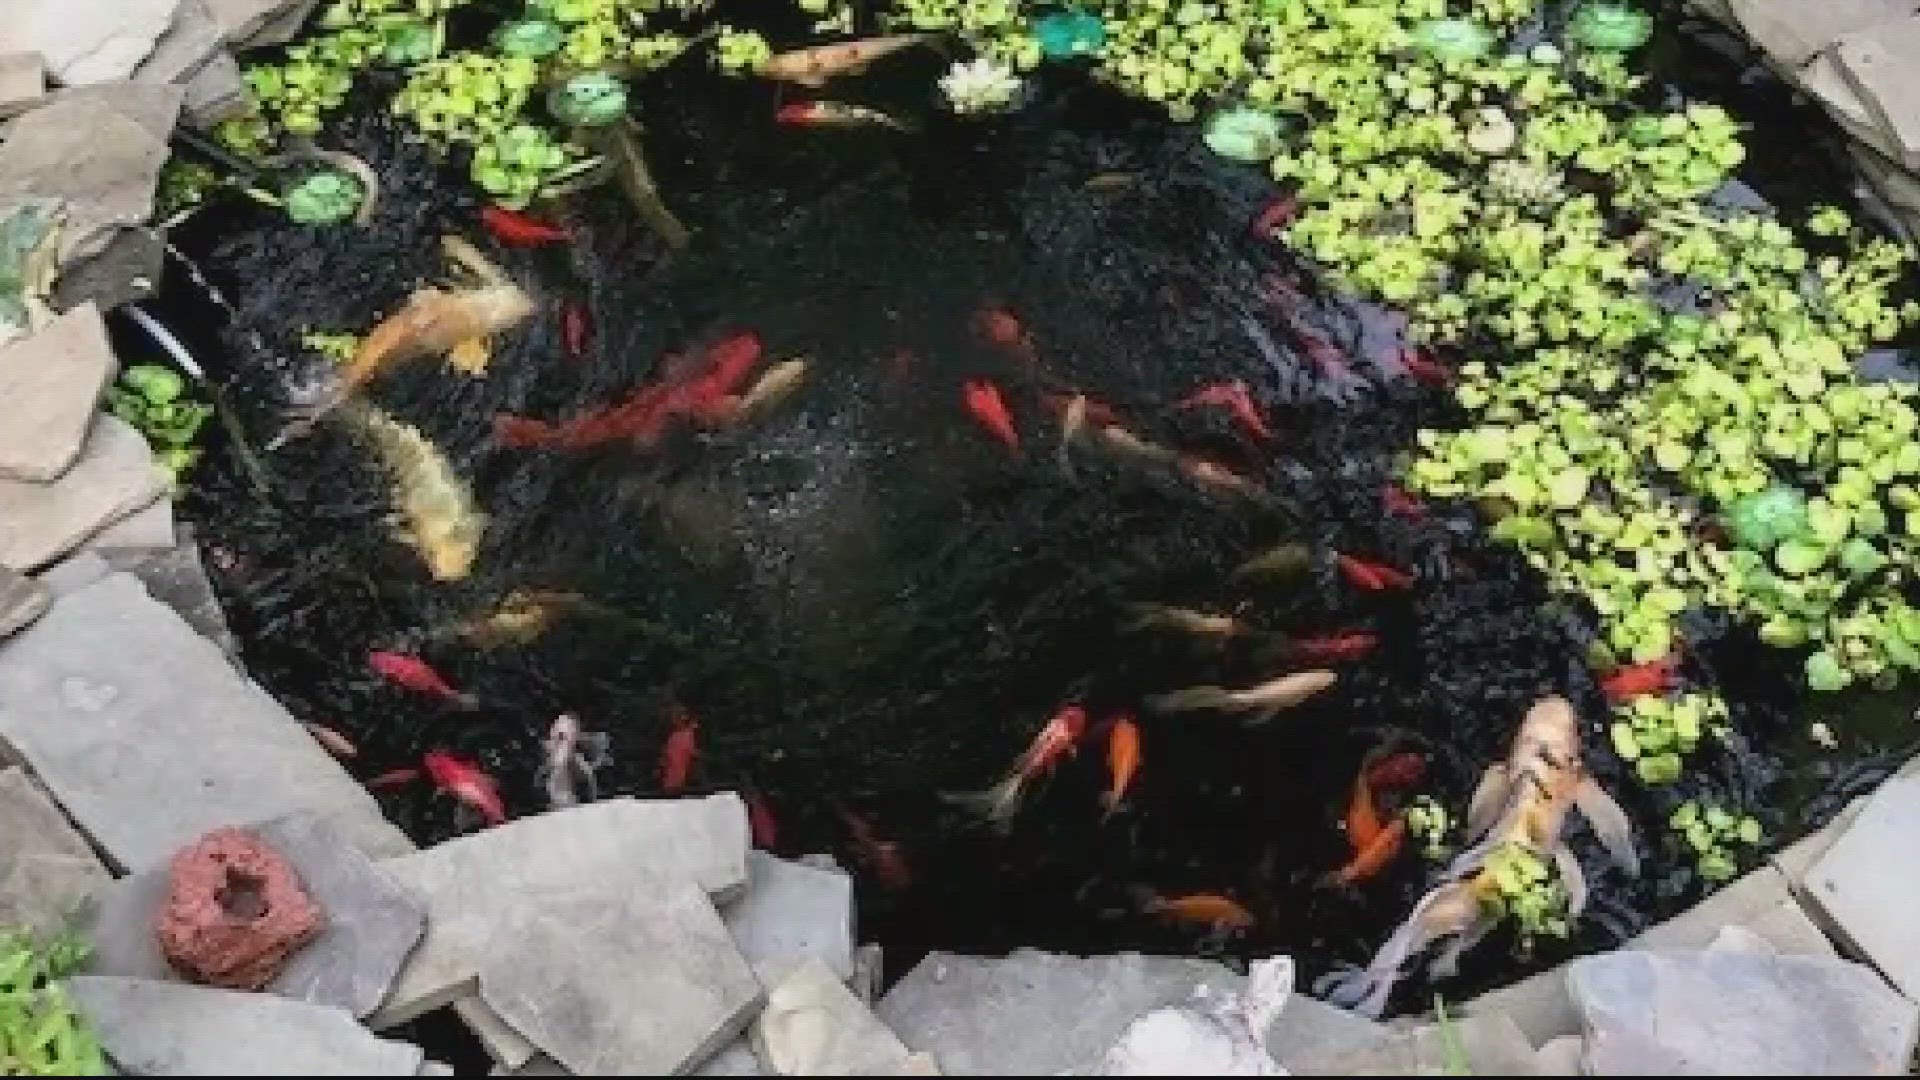 Police in Howard County confirm, they have taken at least 3 reports from residents who believe their prized Japanese Koi fish have been stolen from backyard ponds.